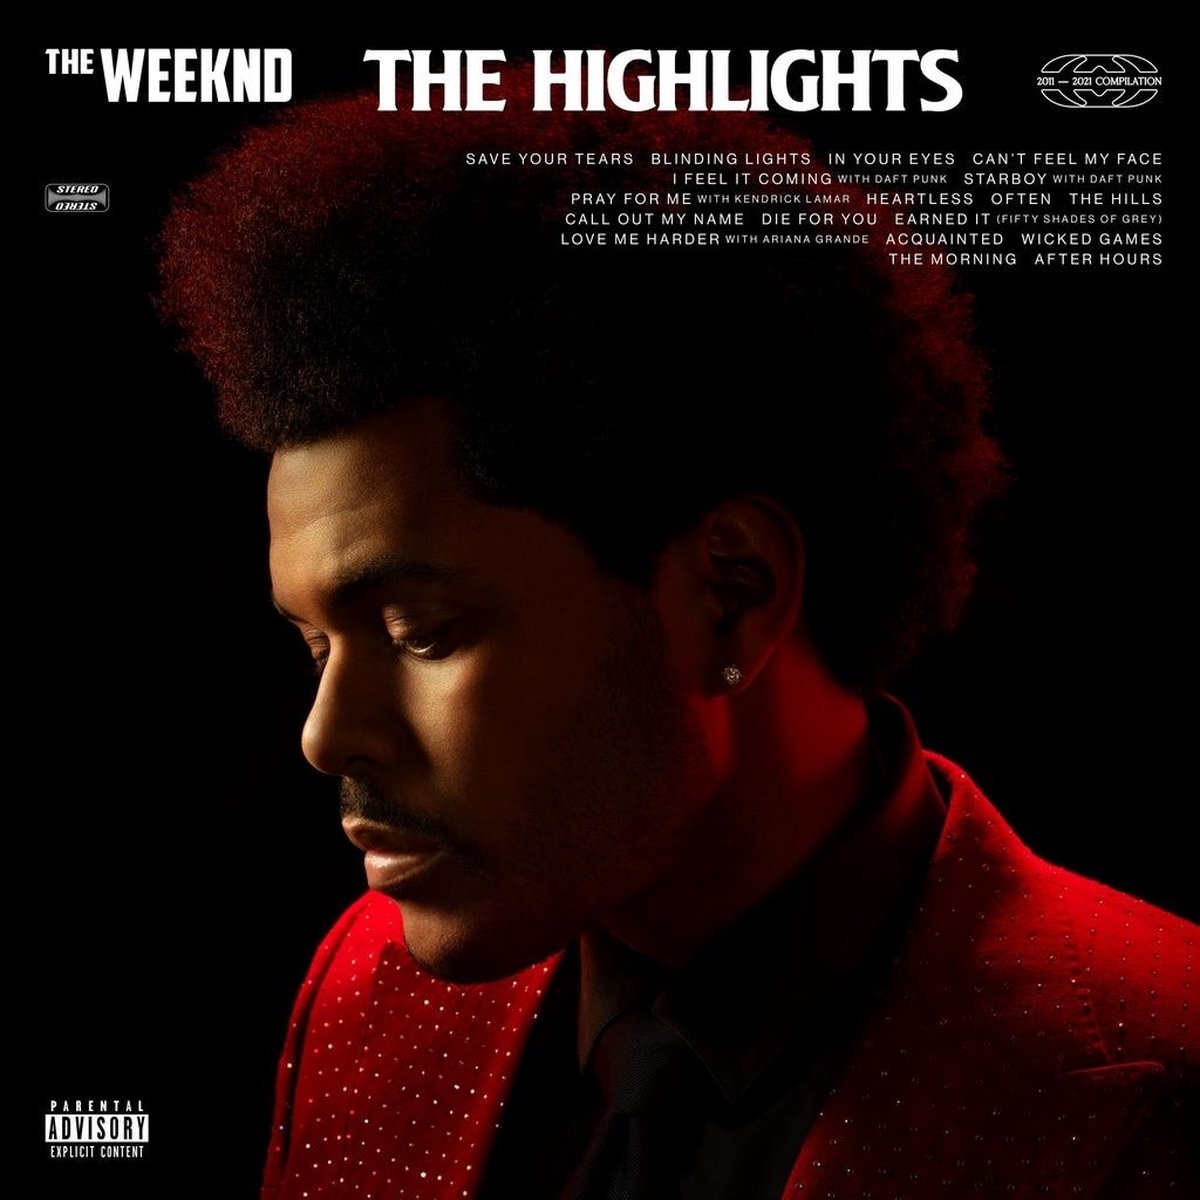 The Weeknd - The Highlights (CD) - The Weeknd